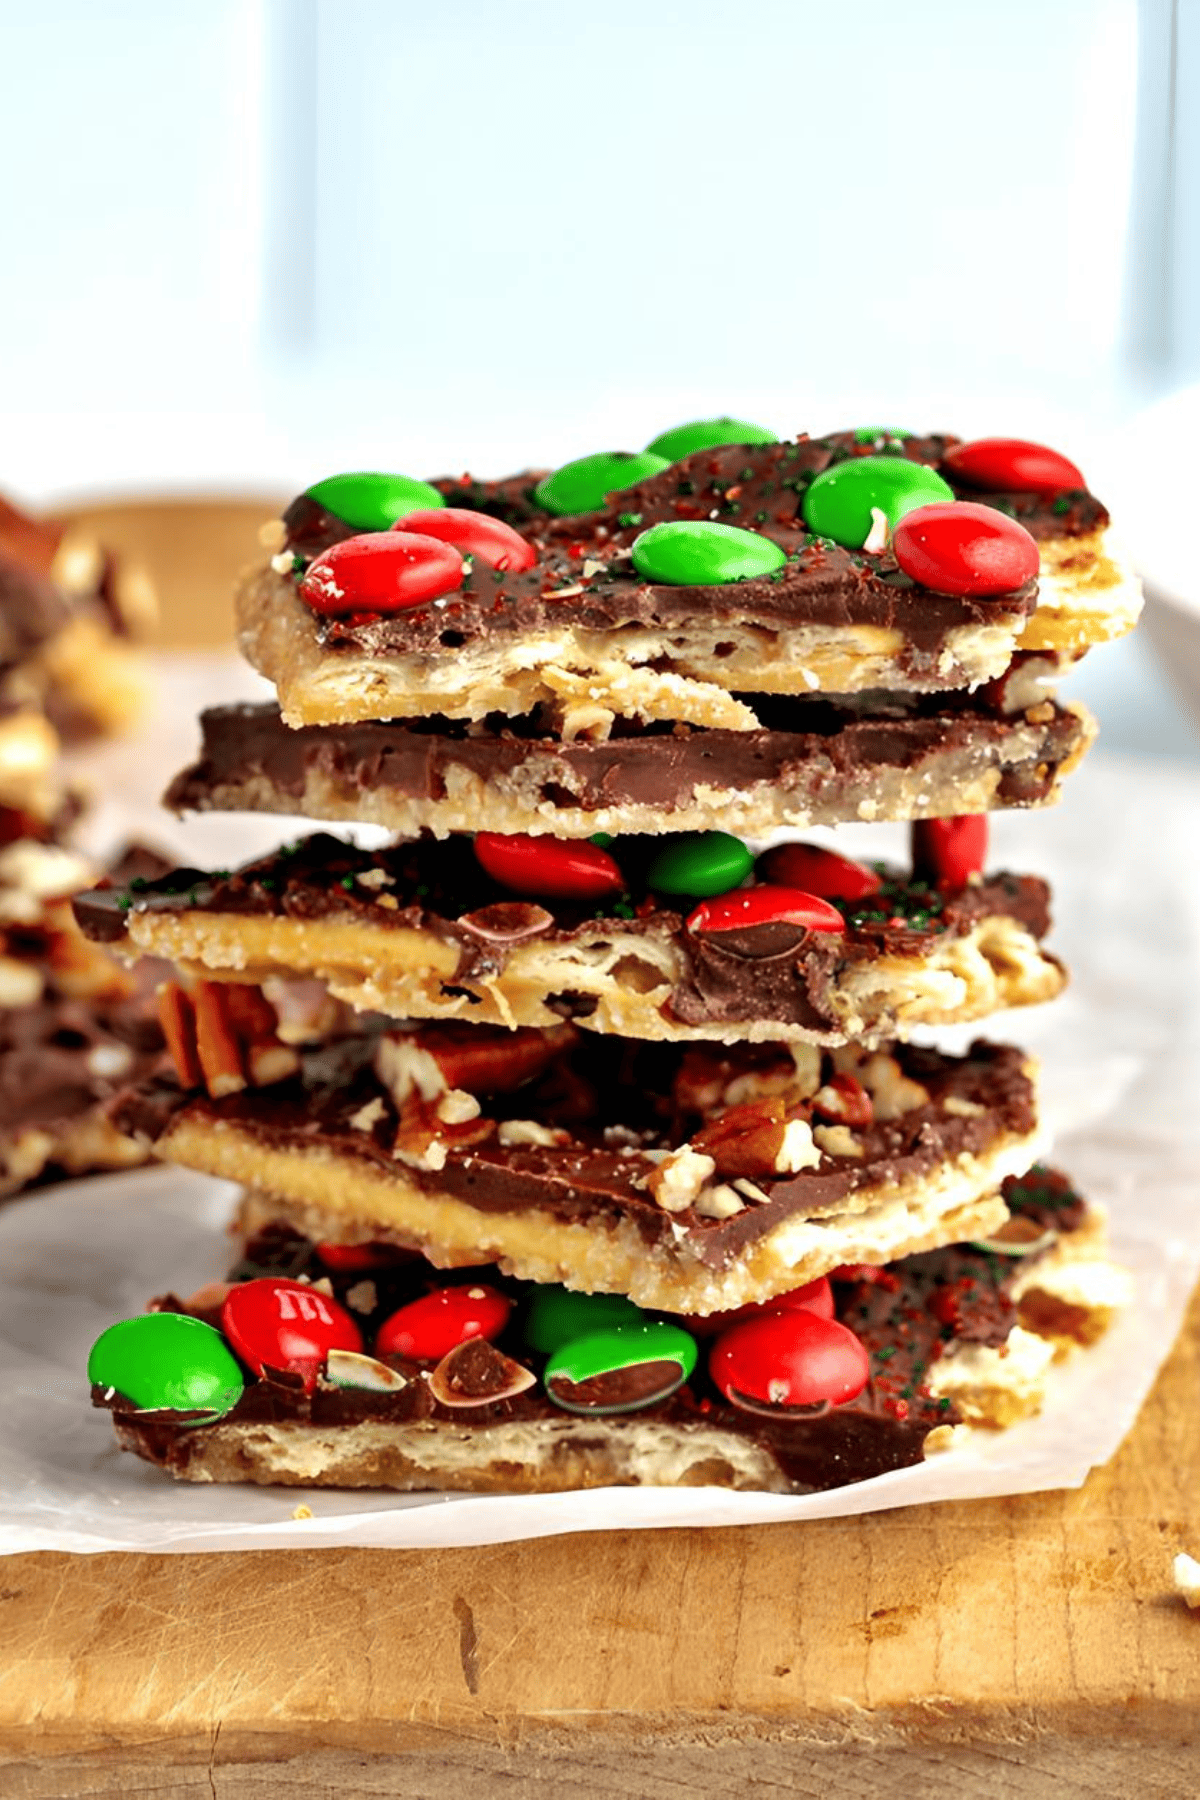 Christmas Crack (a.k.a. cracker toffee)  topped with colorful M&M's candies, stacked together on parchment paper